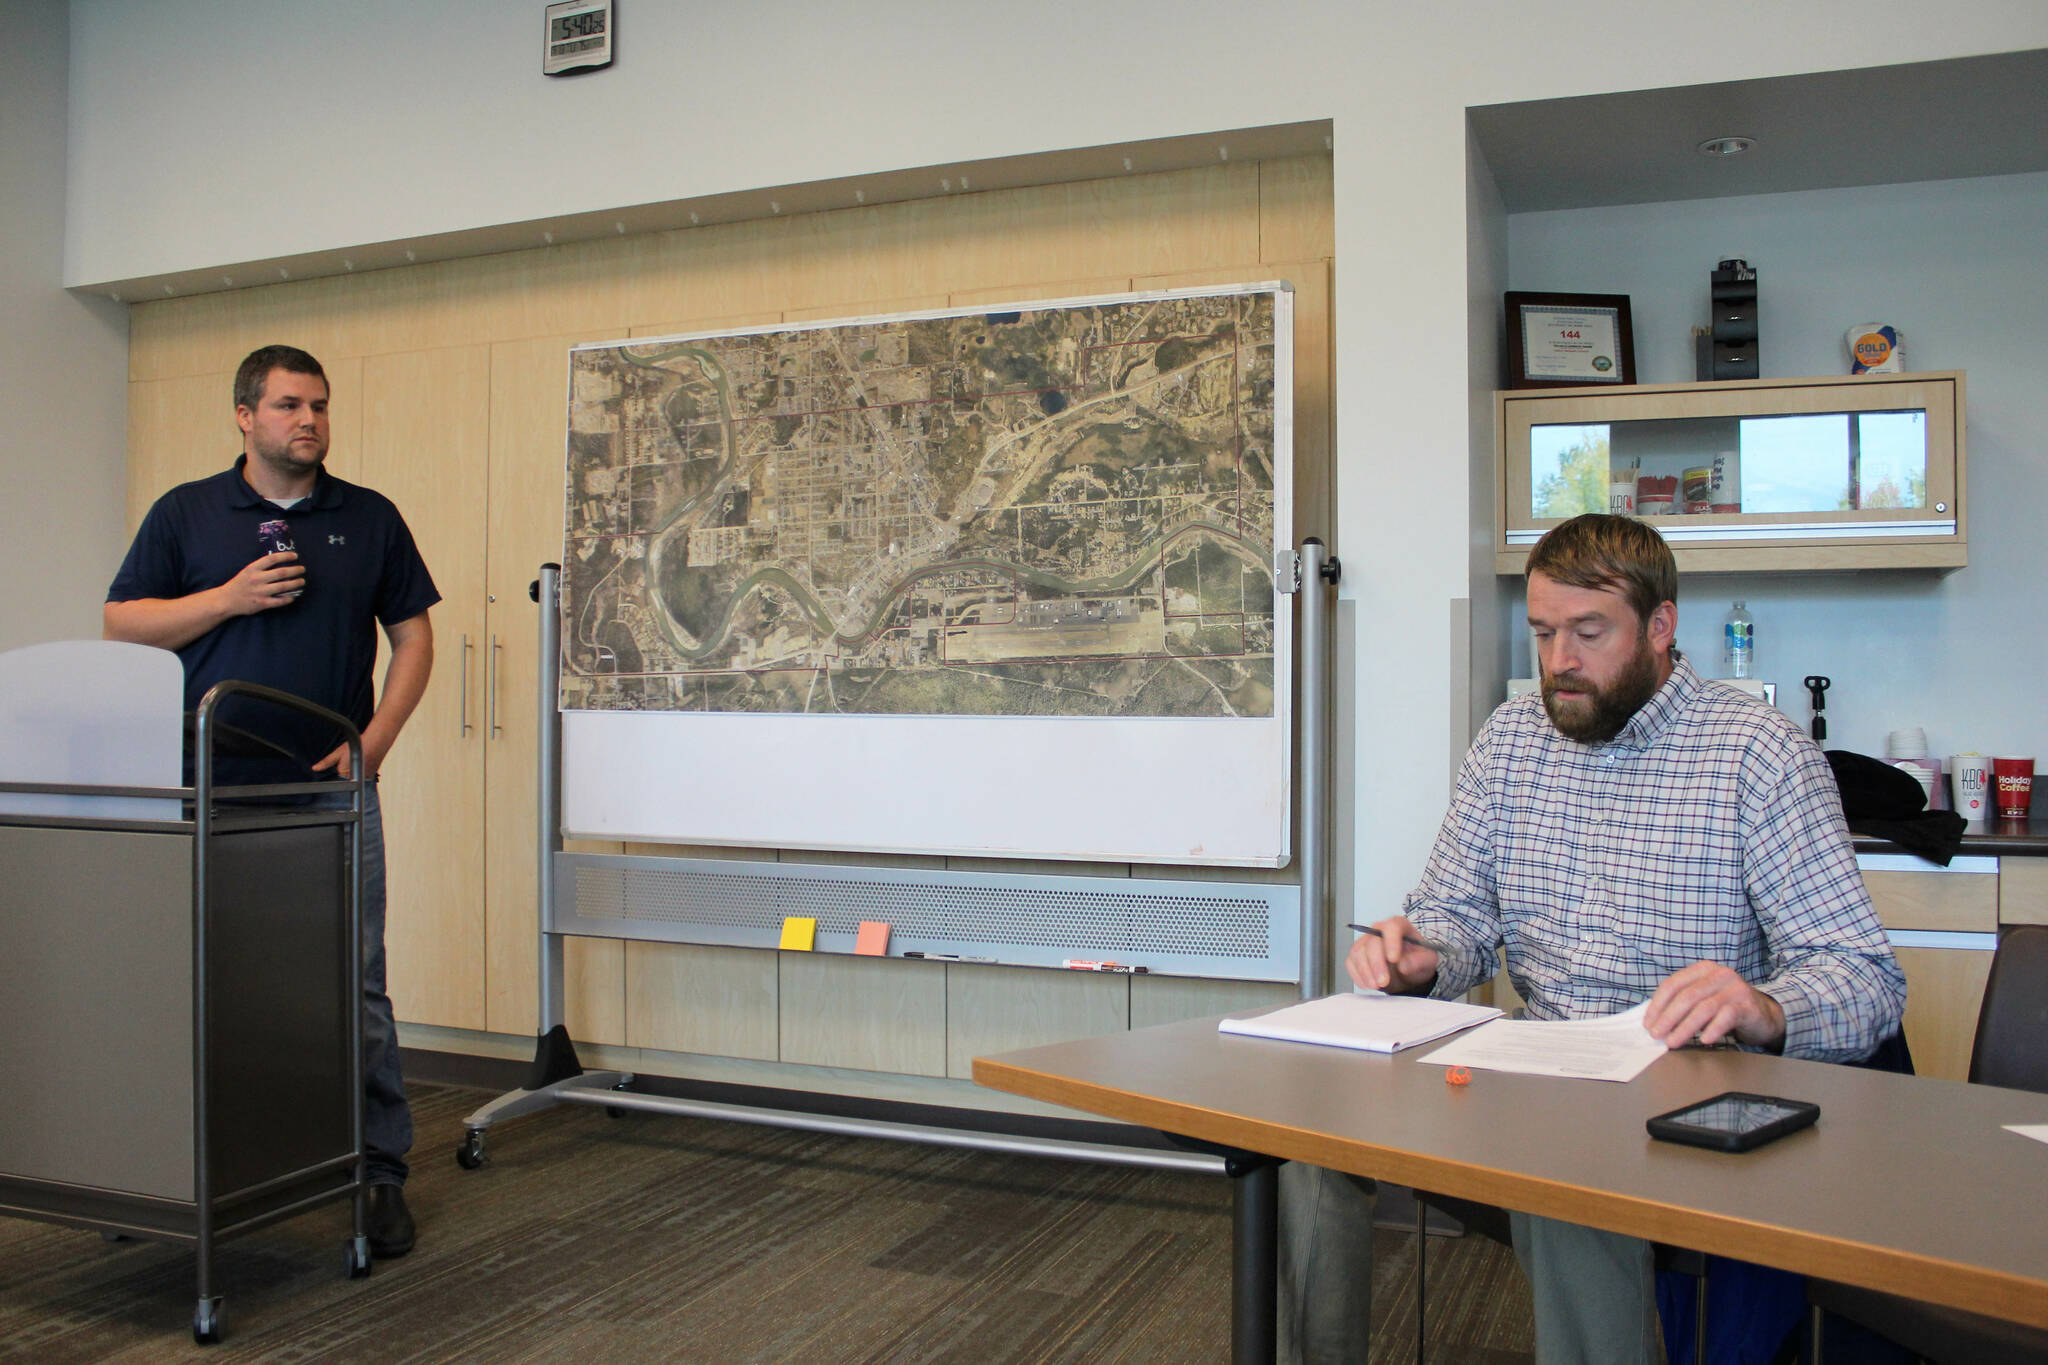 Soldotna Public Works Director Kyle Kornelis, right, answers questions from Jeff Dolifka, left, regarding the Soldotna Field House on Tuesday, Sept. 13, 2022 in Soldotna, Alaska. (Ashlyn O’Hara/Peninsula Clarion)